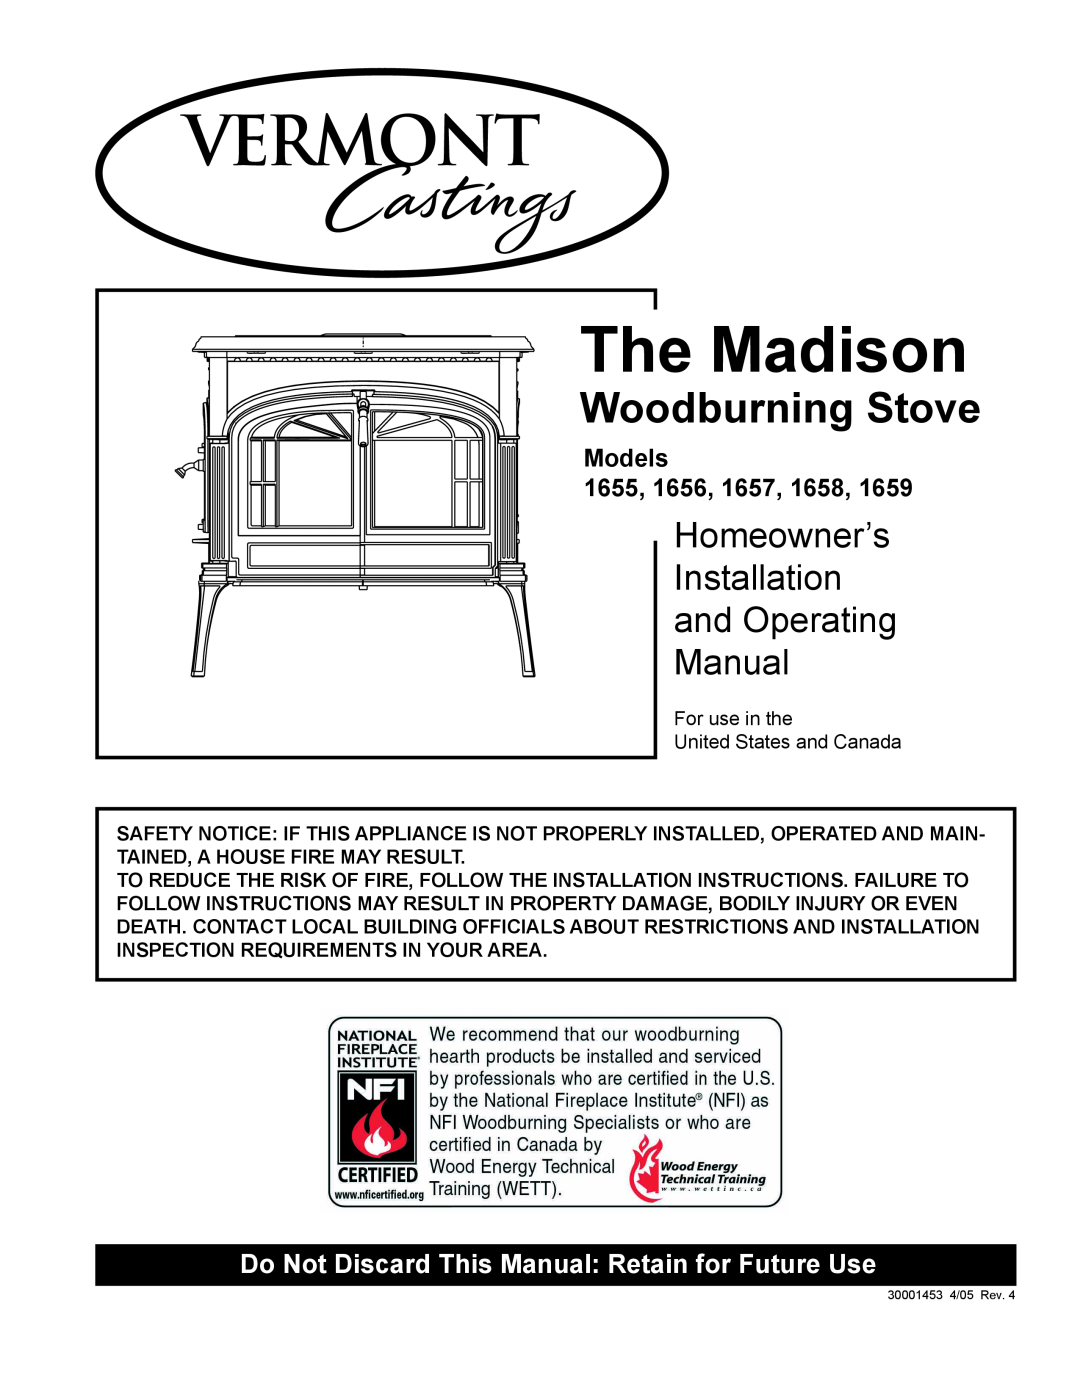 Vermont Casting 1656 installation instructions Woodburning Stove, Models, 1655, The Madison, Homeowner’s, Installation 